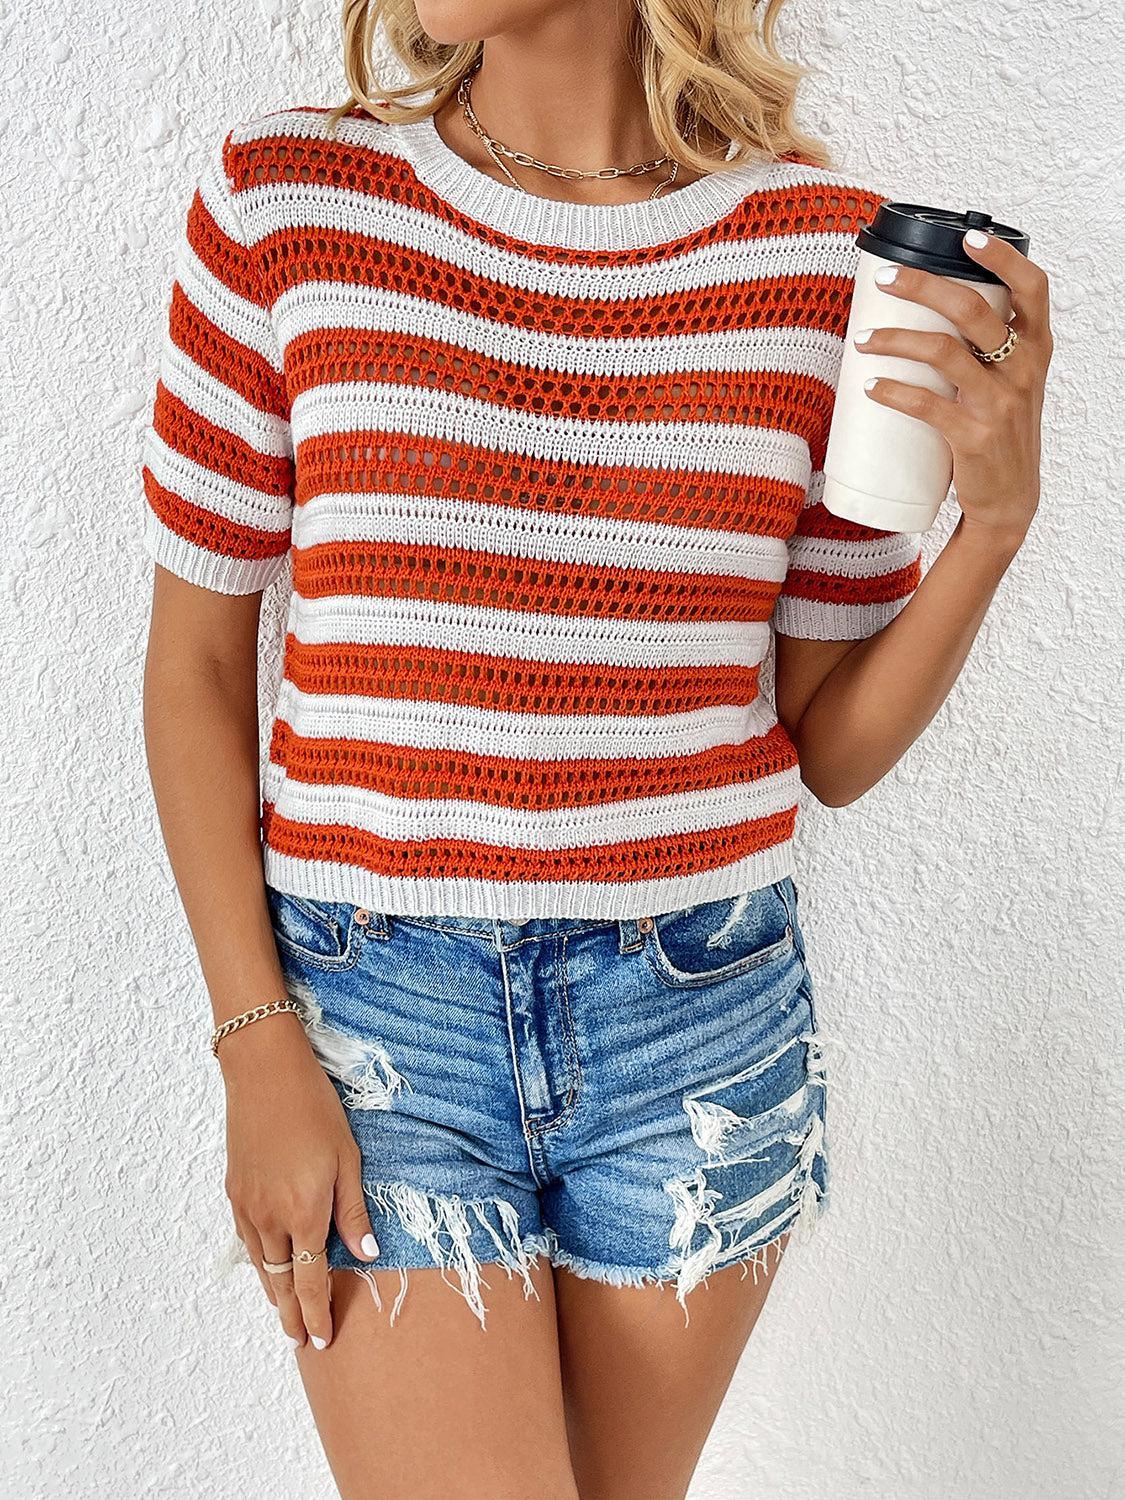 a woman in a striped sweater holding a cup of coffee